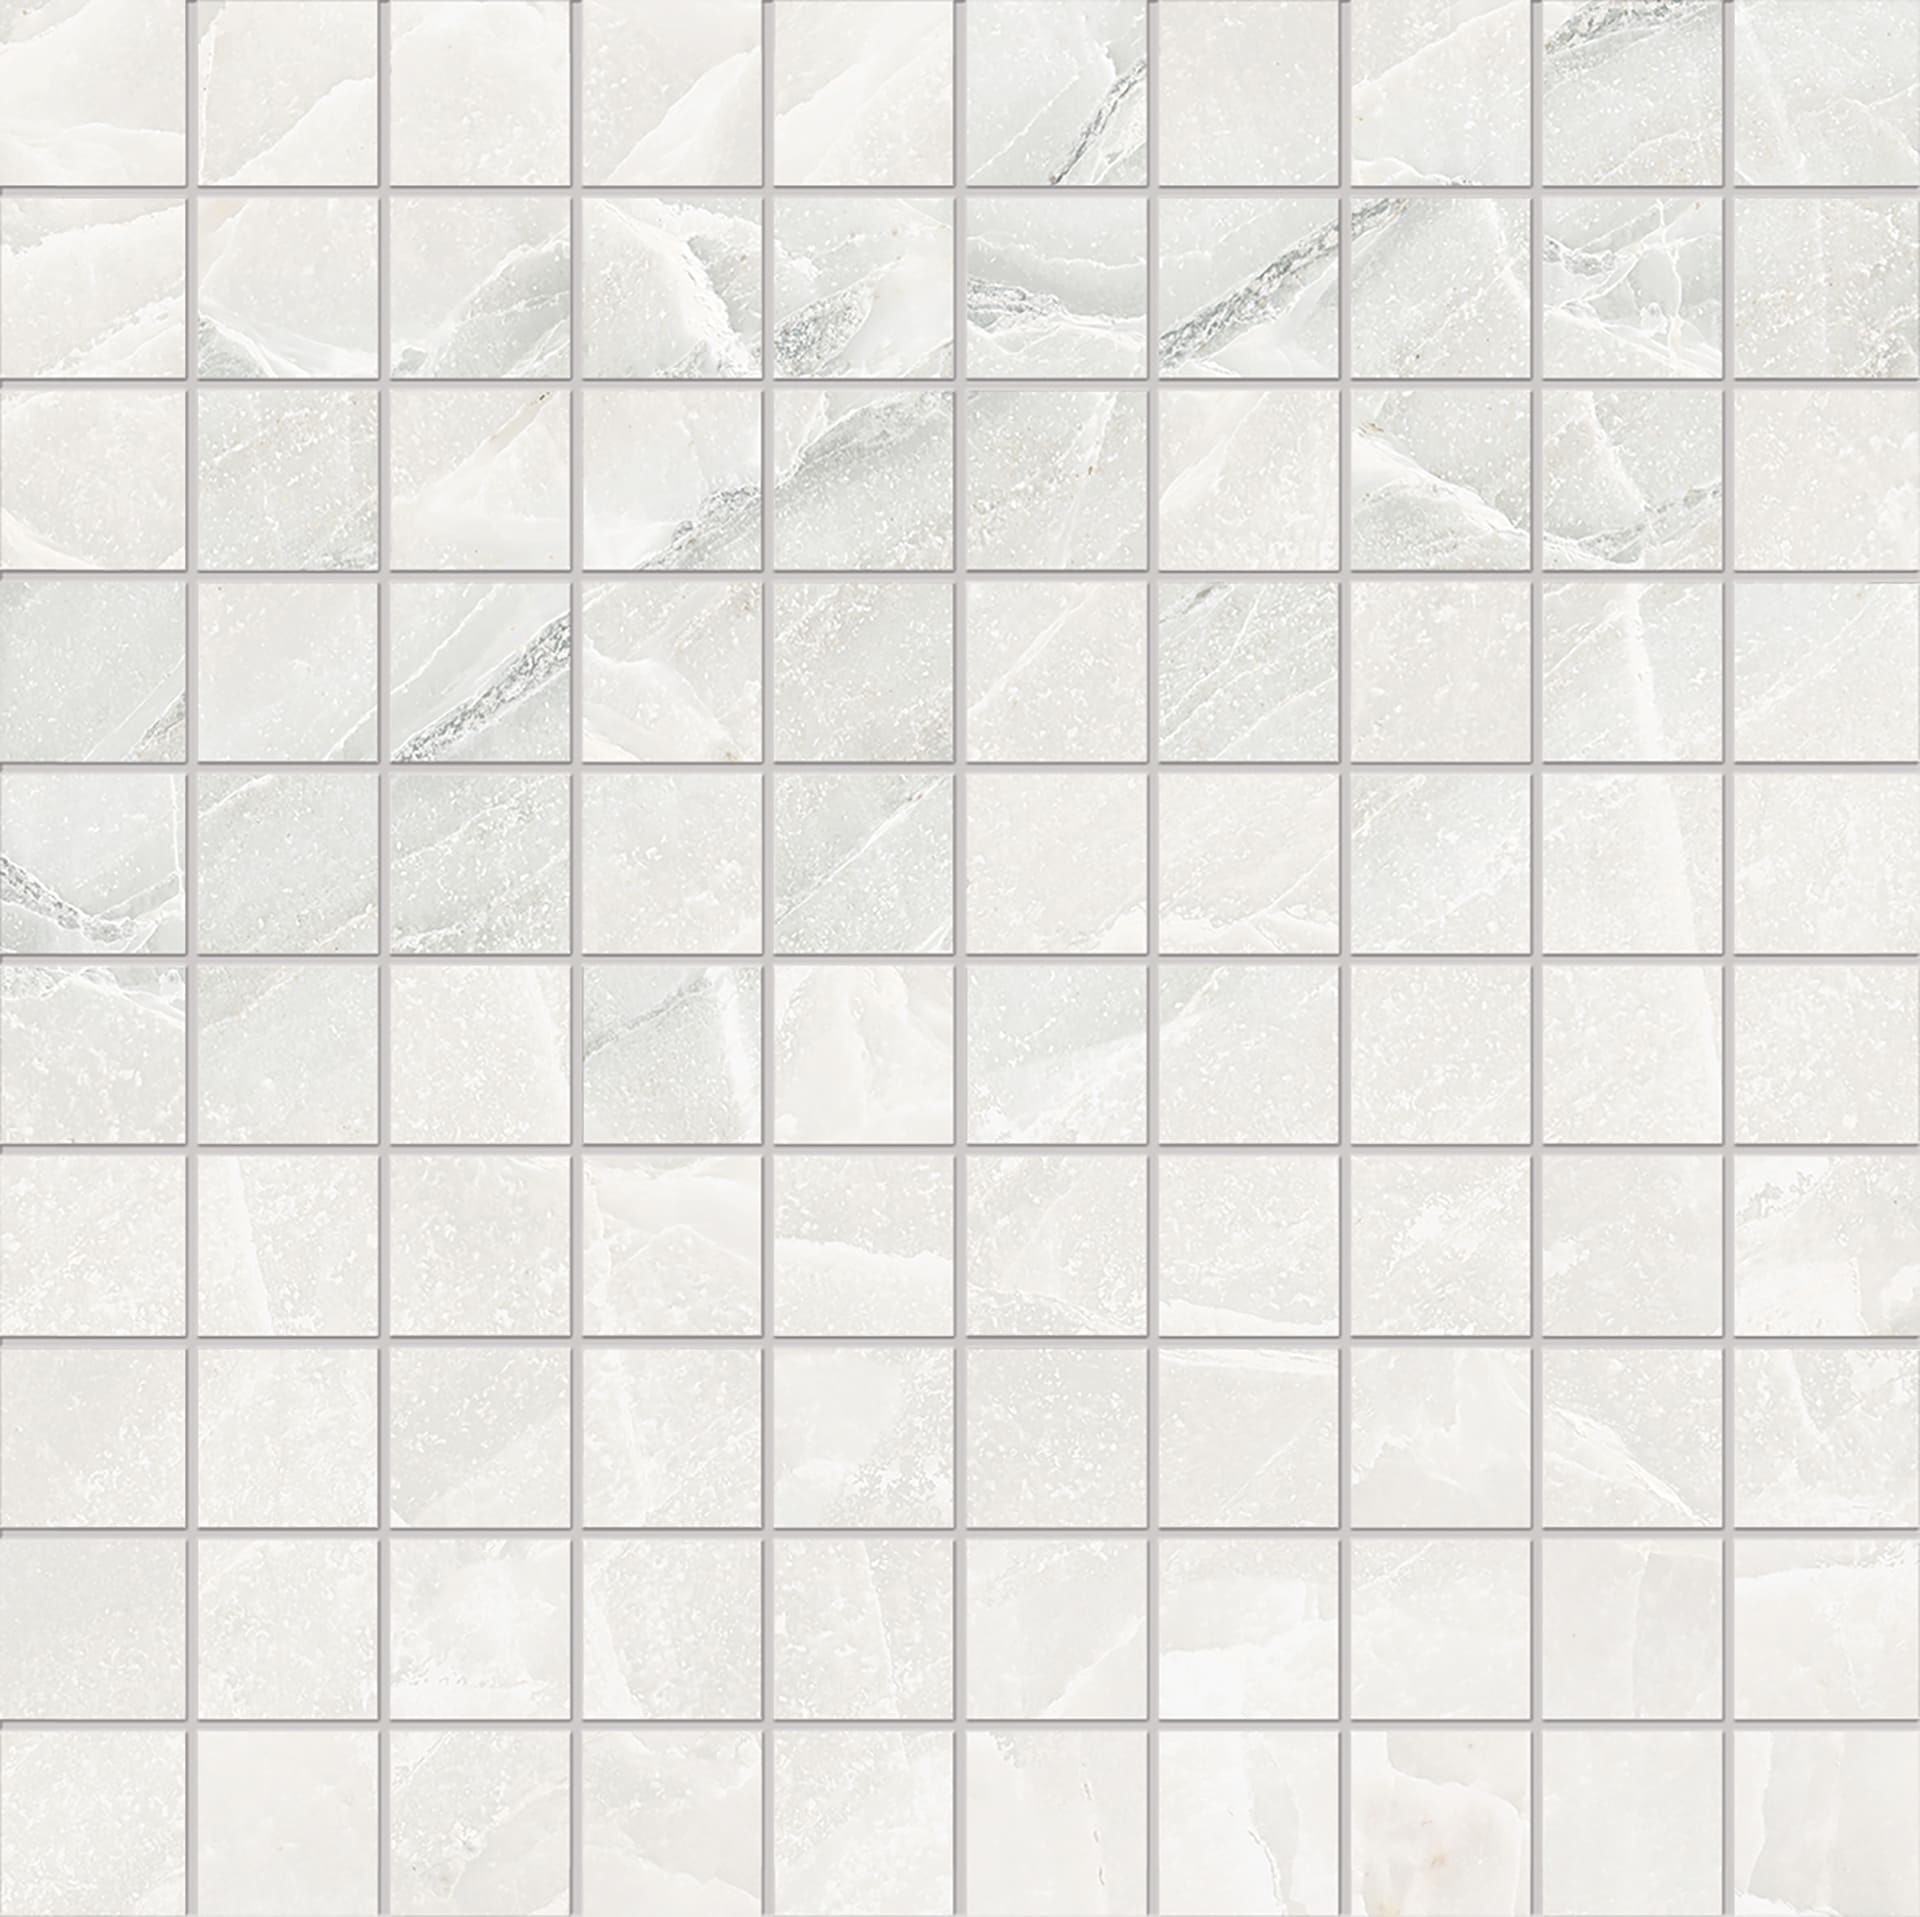 Tele Di Marmo Selection: Marble White Paradise Straight Stack 1x1 Mosaic (12"x12"x9.5-mm | glossy)